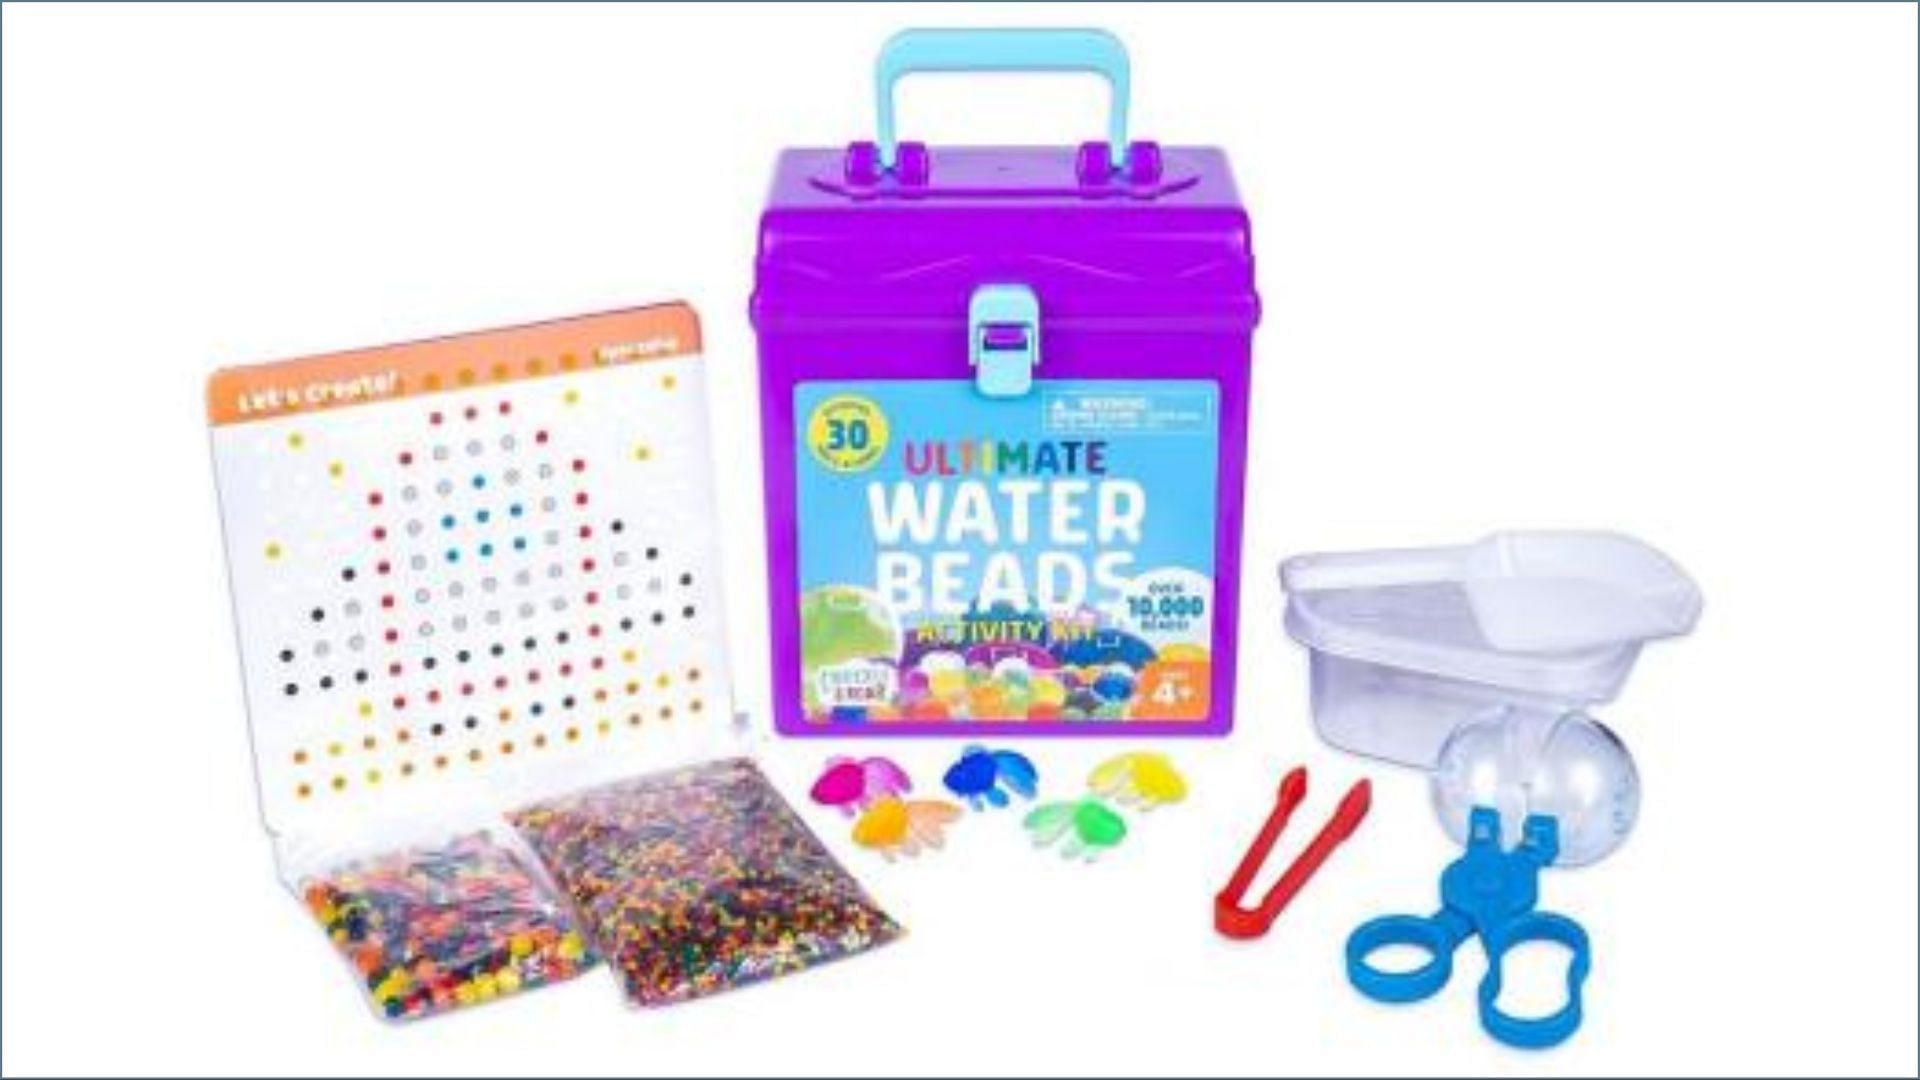 Packaging of the products affected by the water beads recall (Image via CPSC)